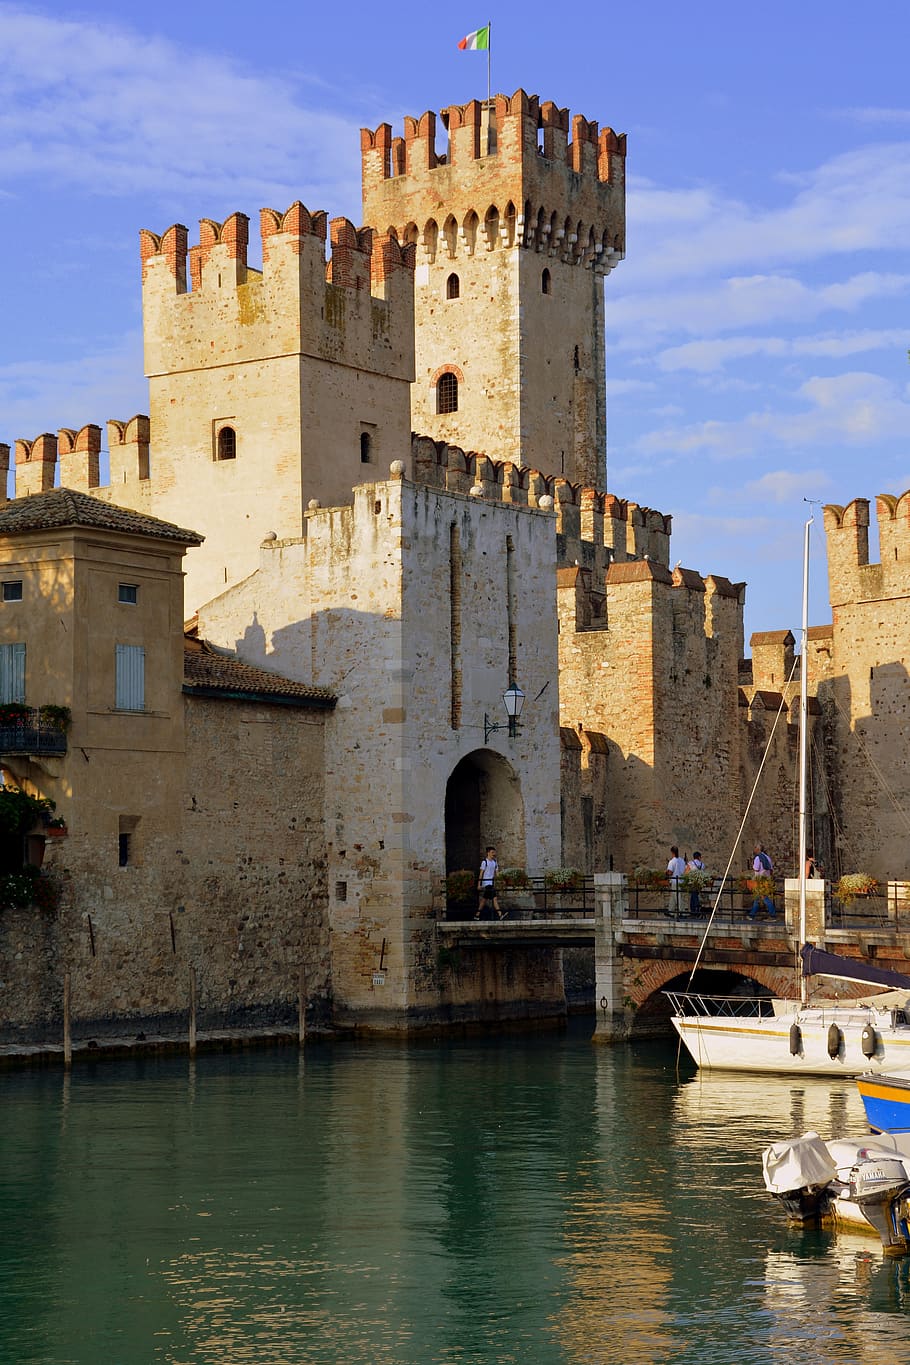 torre, castle, water, boats, sky, flag, italiana, sirmione, italy, architecture